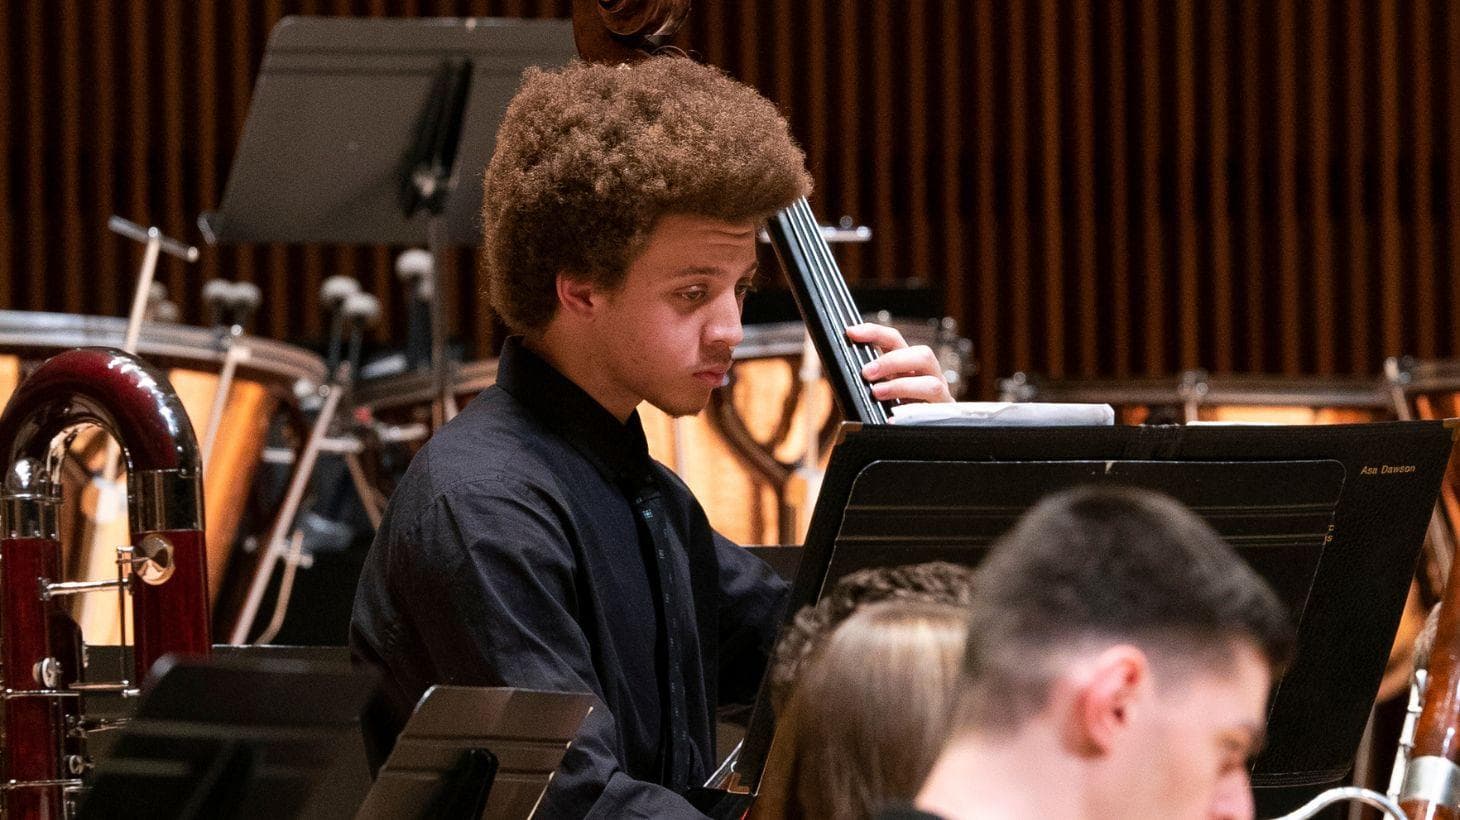 Student plays cello on stage.